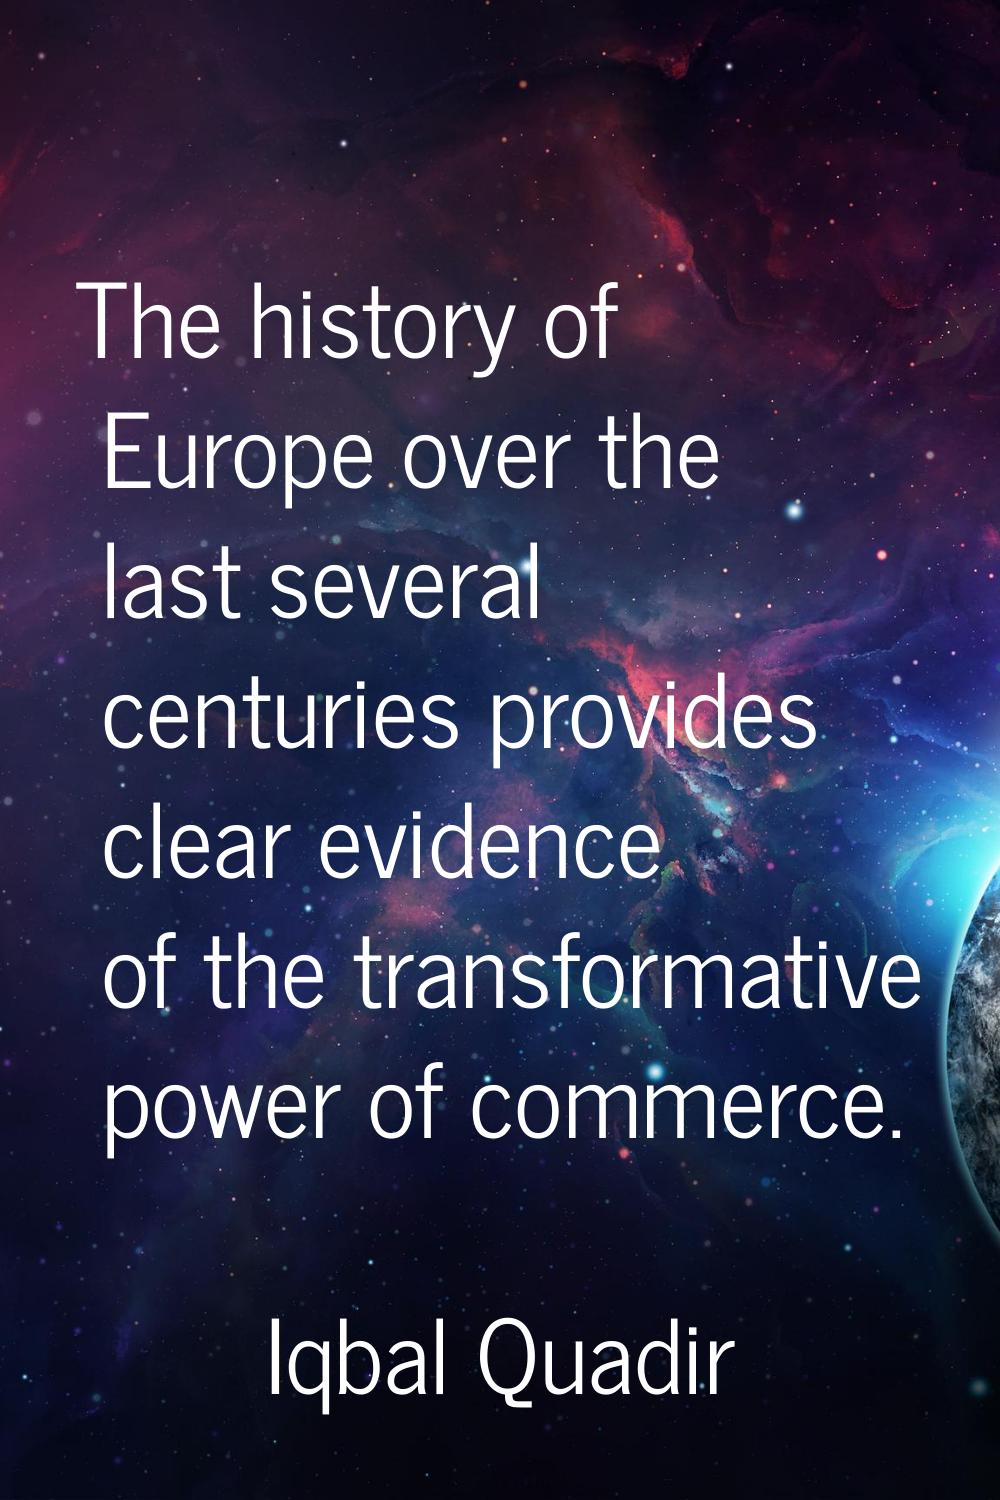 The history of Europe over the last several centuries provides clear evidence of the transformative